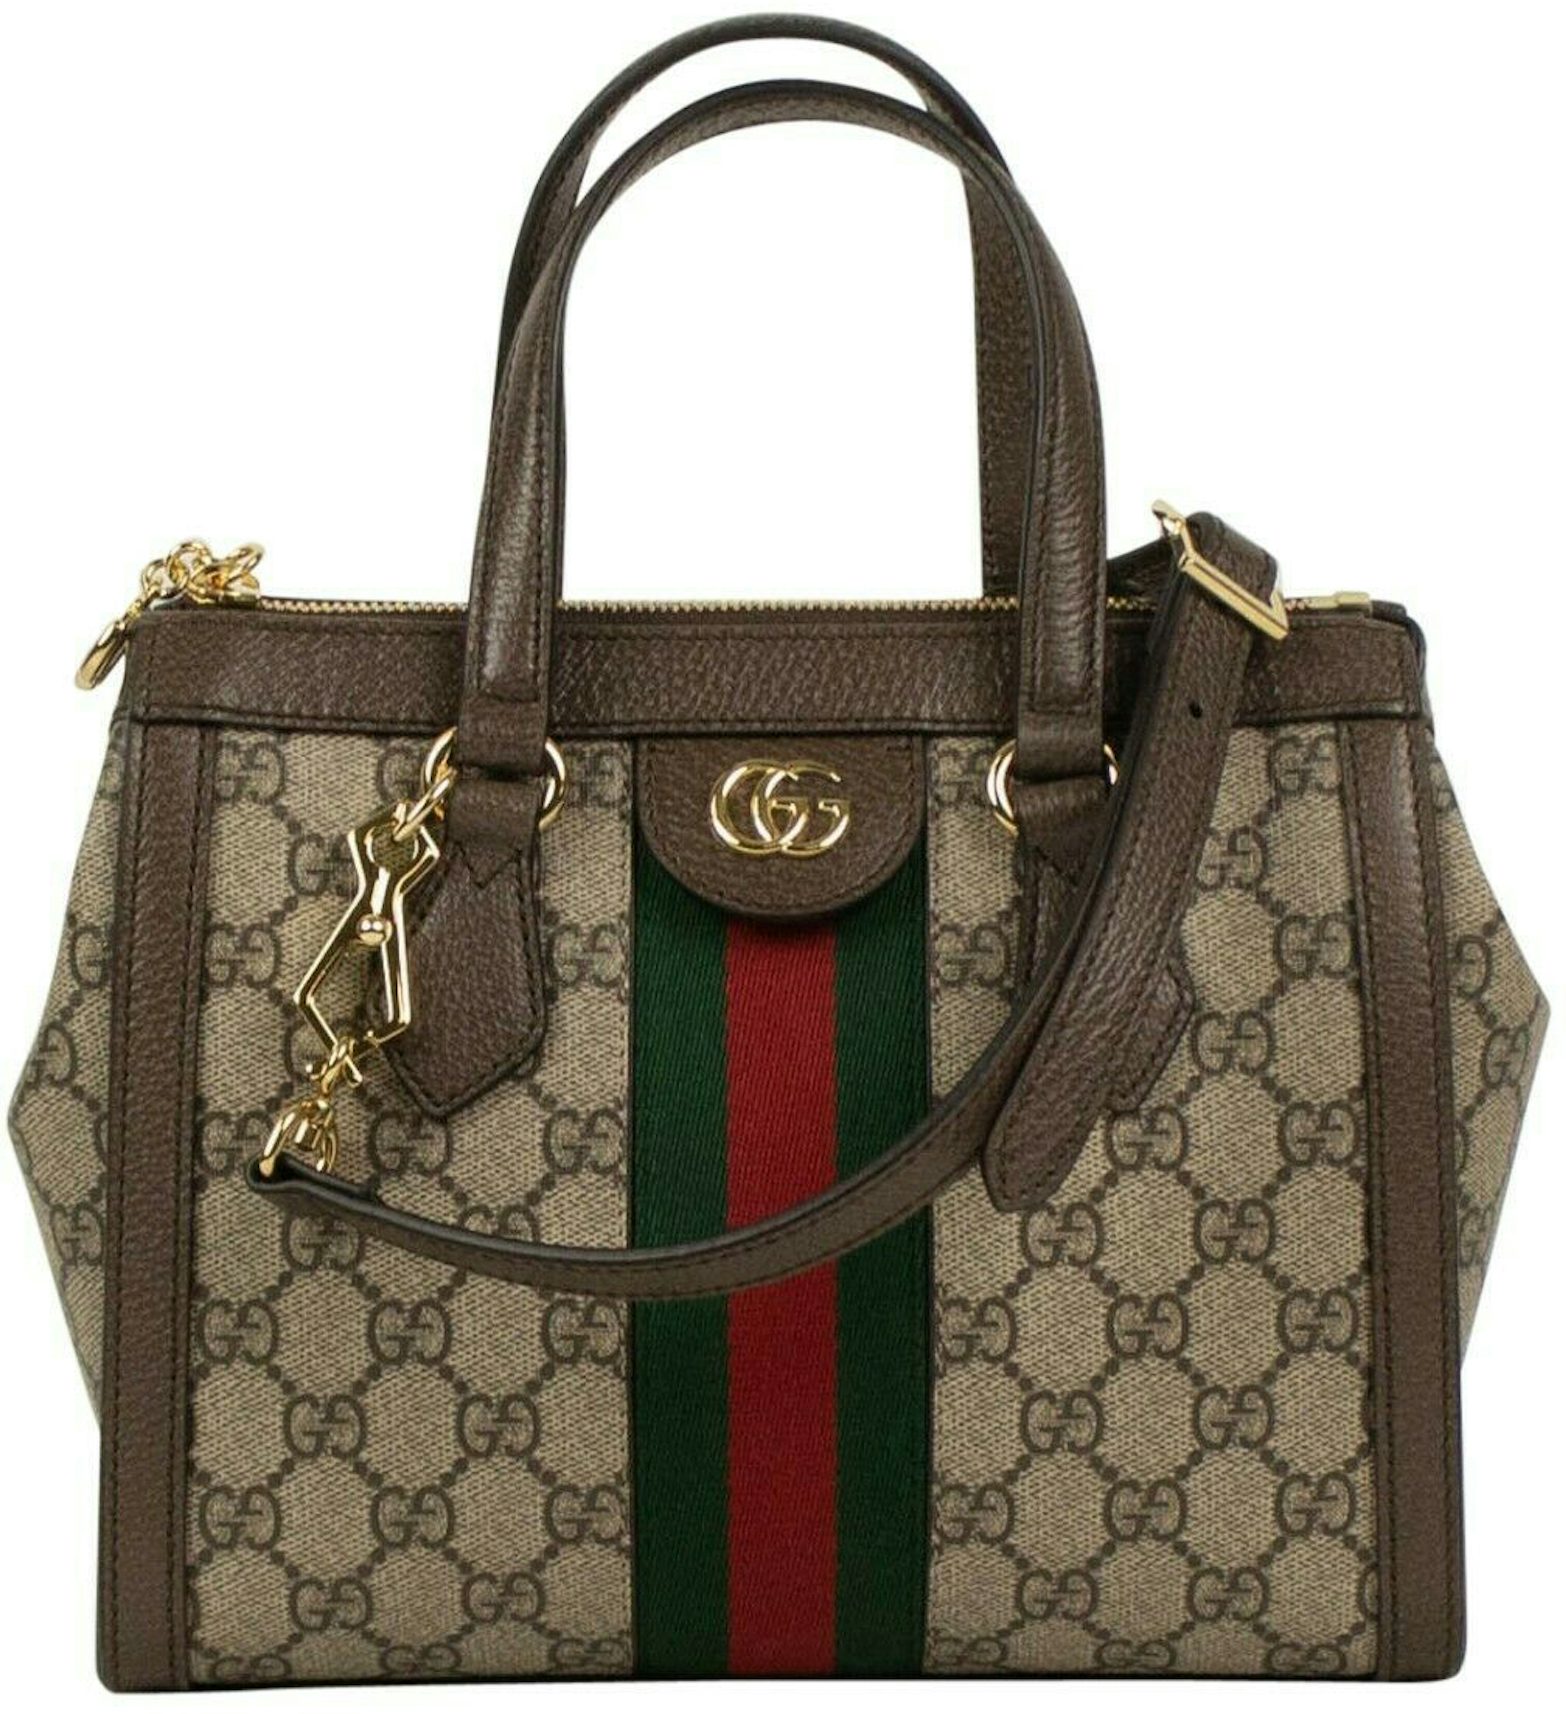 Gucci Diana Jumbo GG Small Tote Bag Beige Gold Hardware w/Accessories Ladies